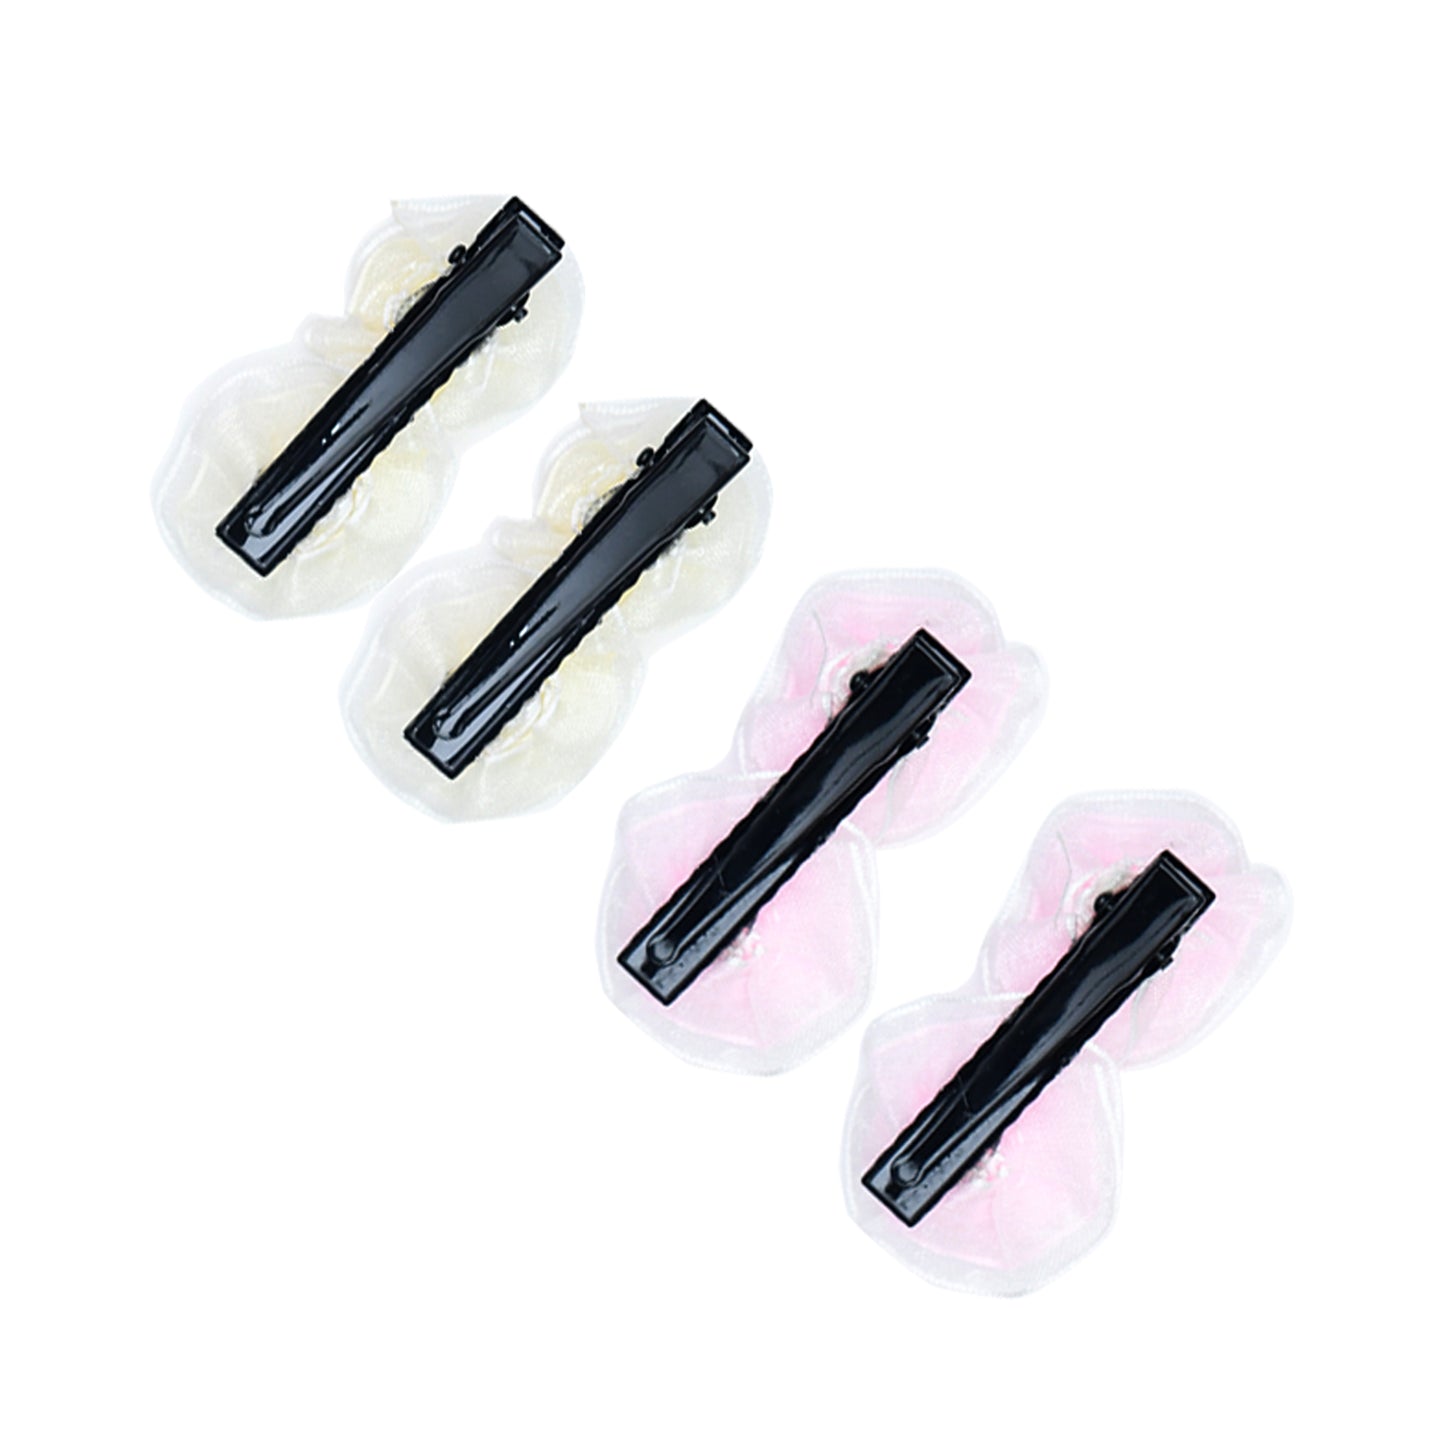 Set of 4 Multicolor Chic & Sleek Hair Clips for Girls